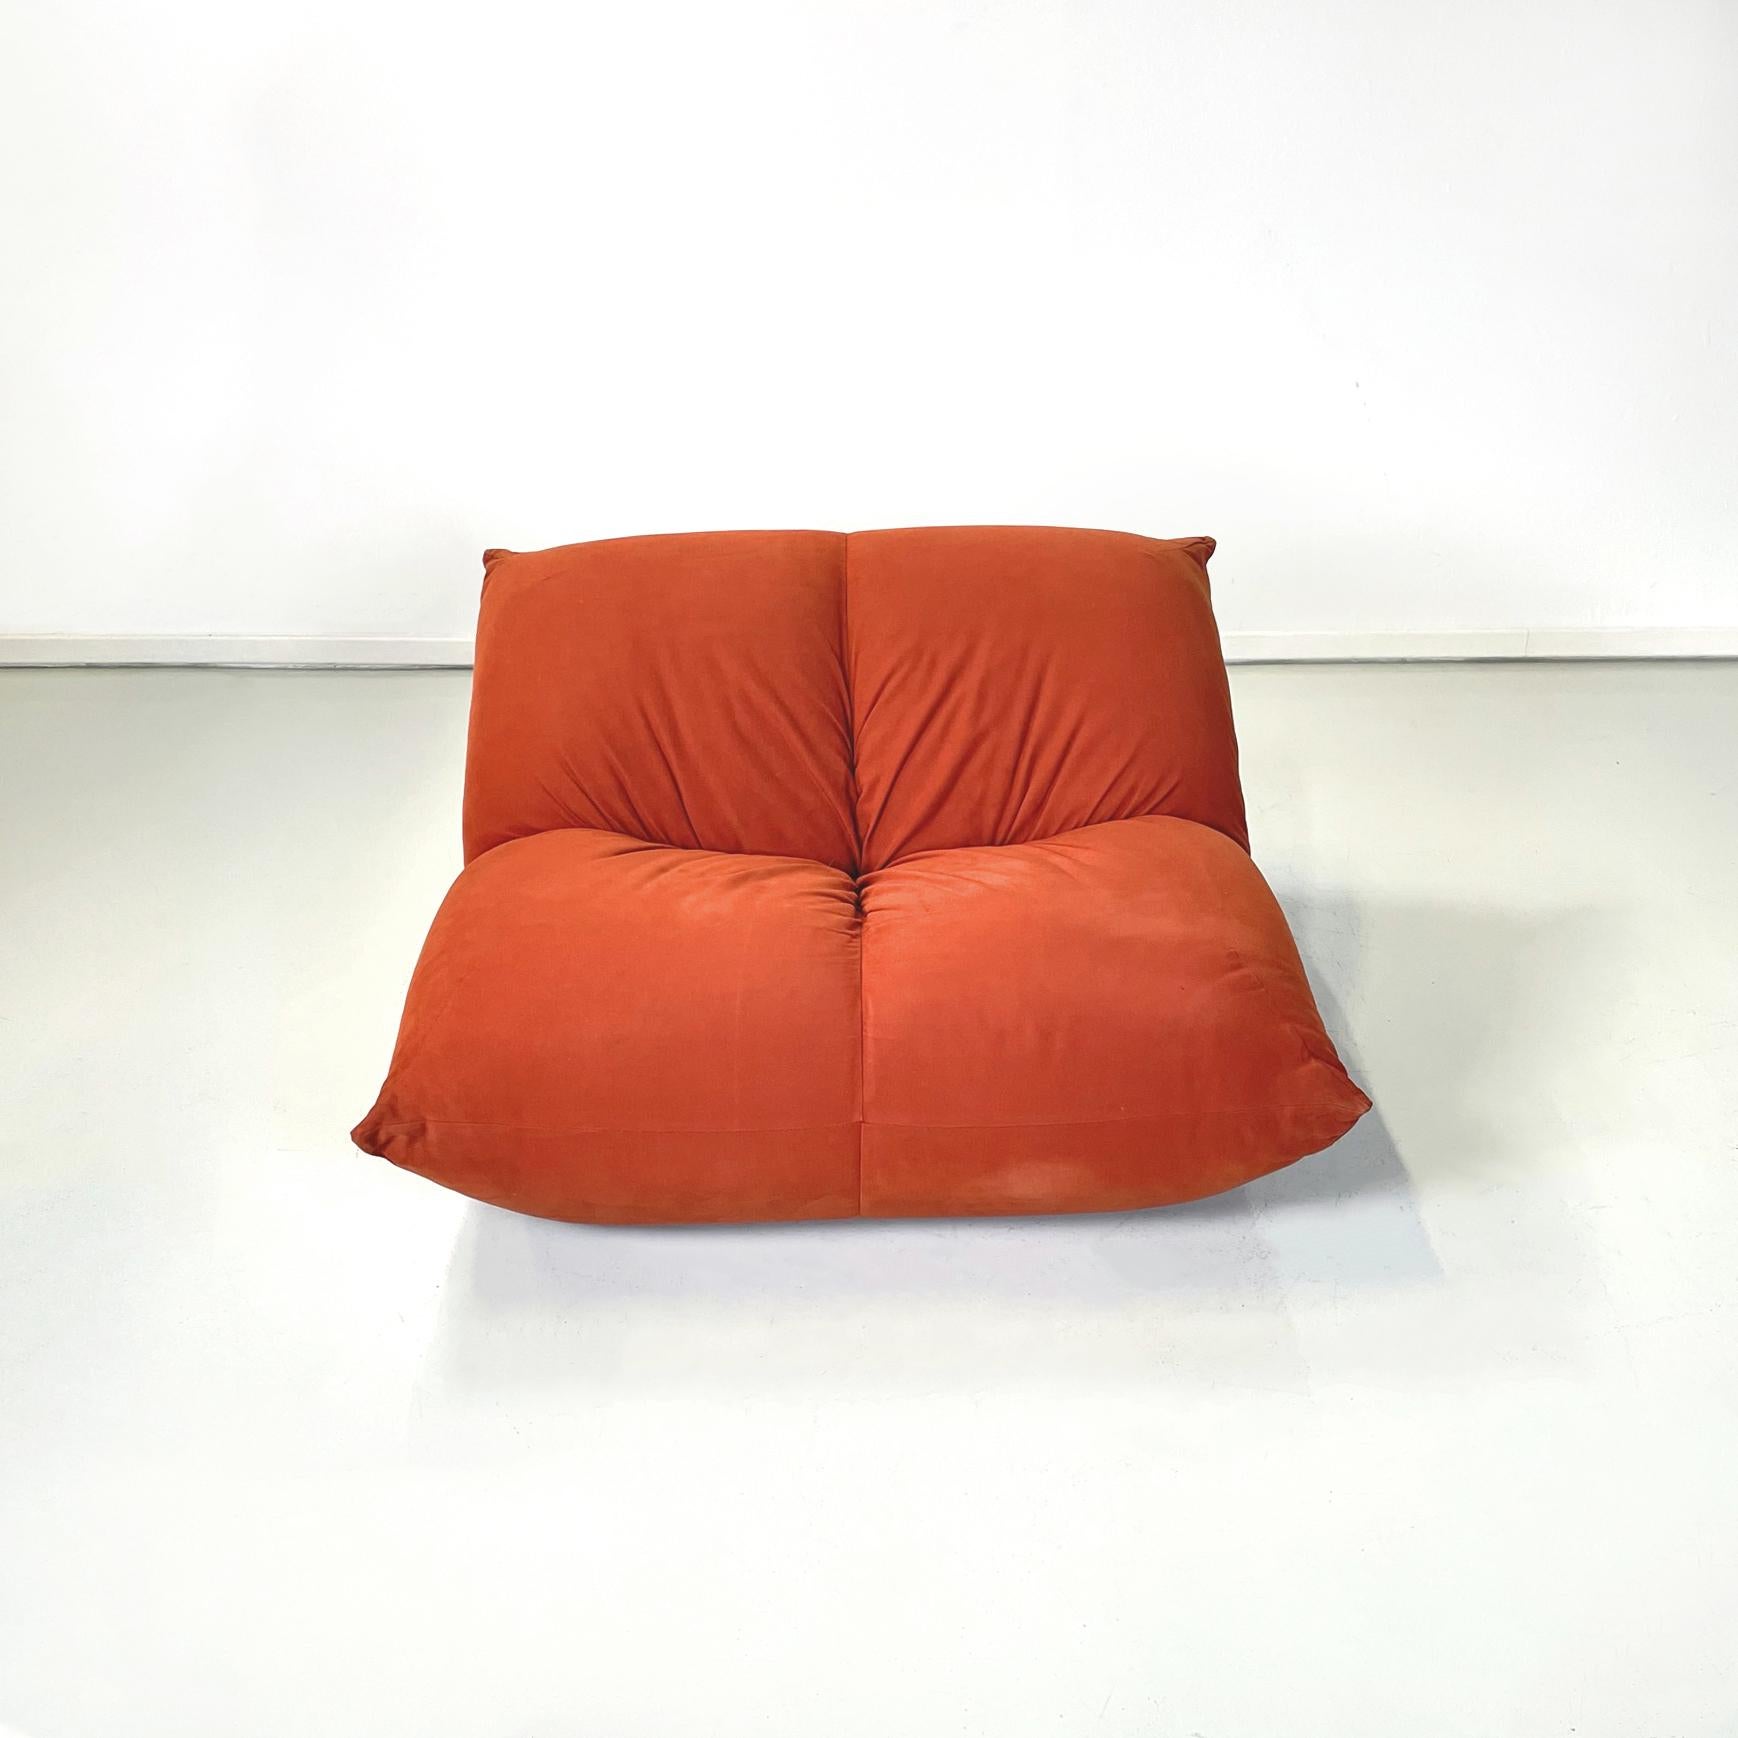 Italian modern Brick red fabric Armchair mod. Papillon by Guido Rosati for Giovannetti, 1970s
Armchair mod. Papillon in brick red-orange fabric. The armchair has an extremely comfortable seat, entirely padded with polyurethane foam and covered in